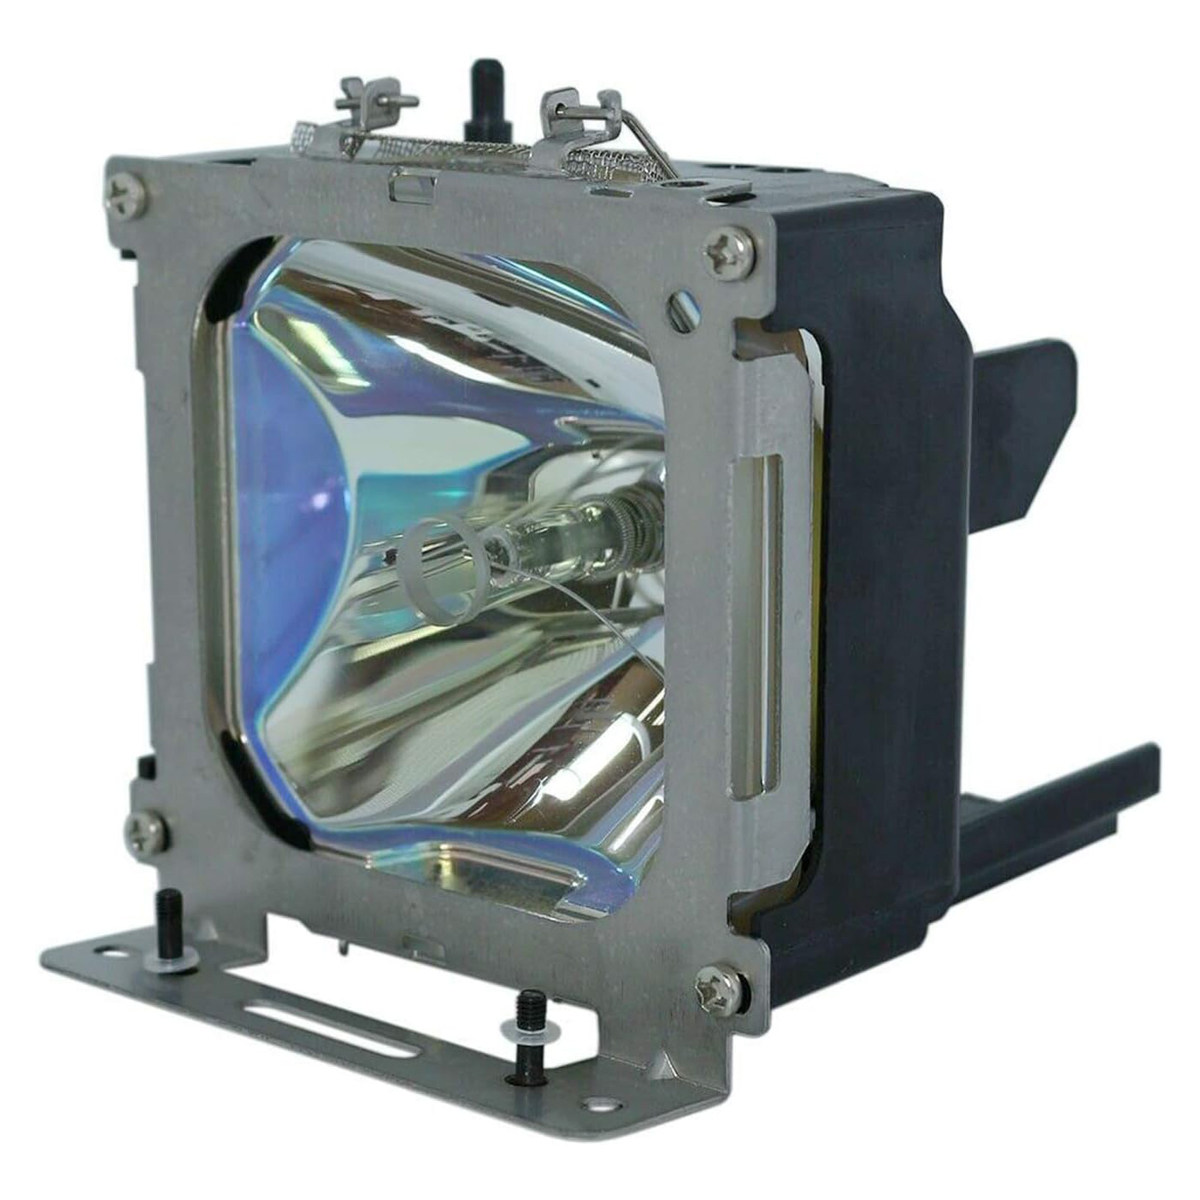 Replacement Projector lamp 78-6969-9548-5 For 3M MP8775i MP8795